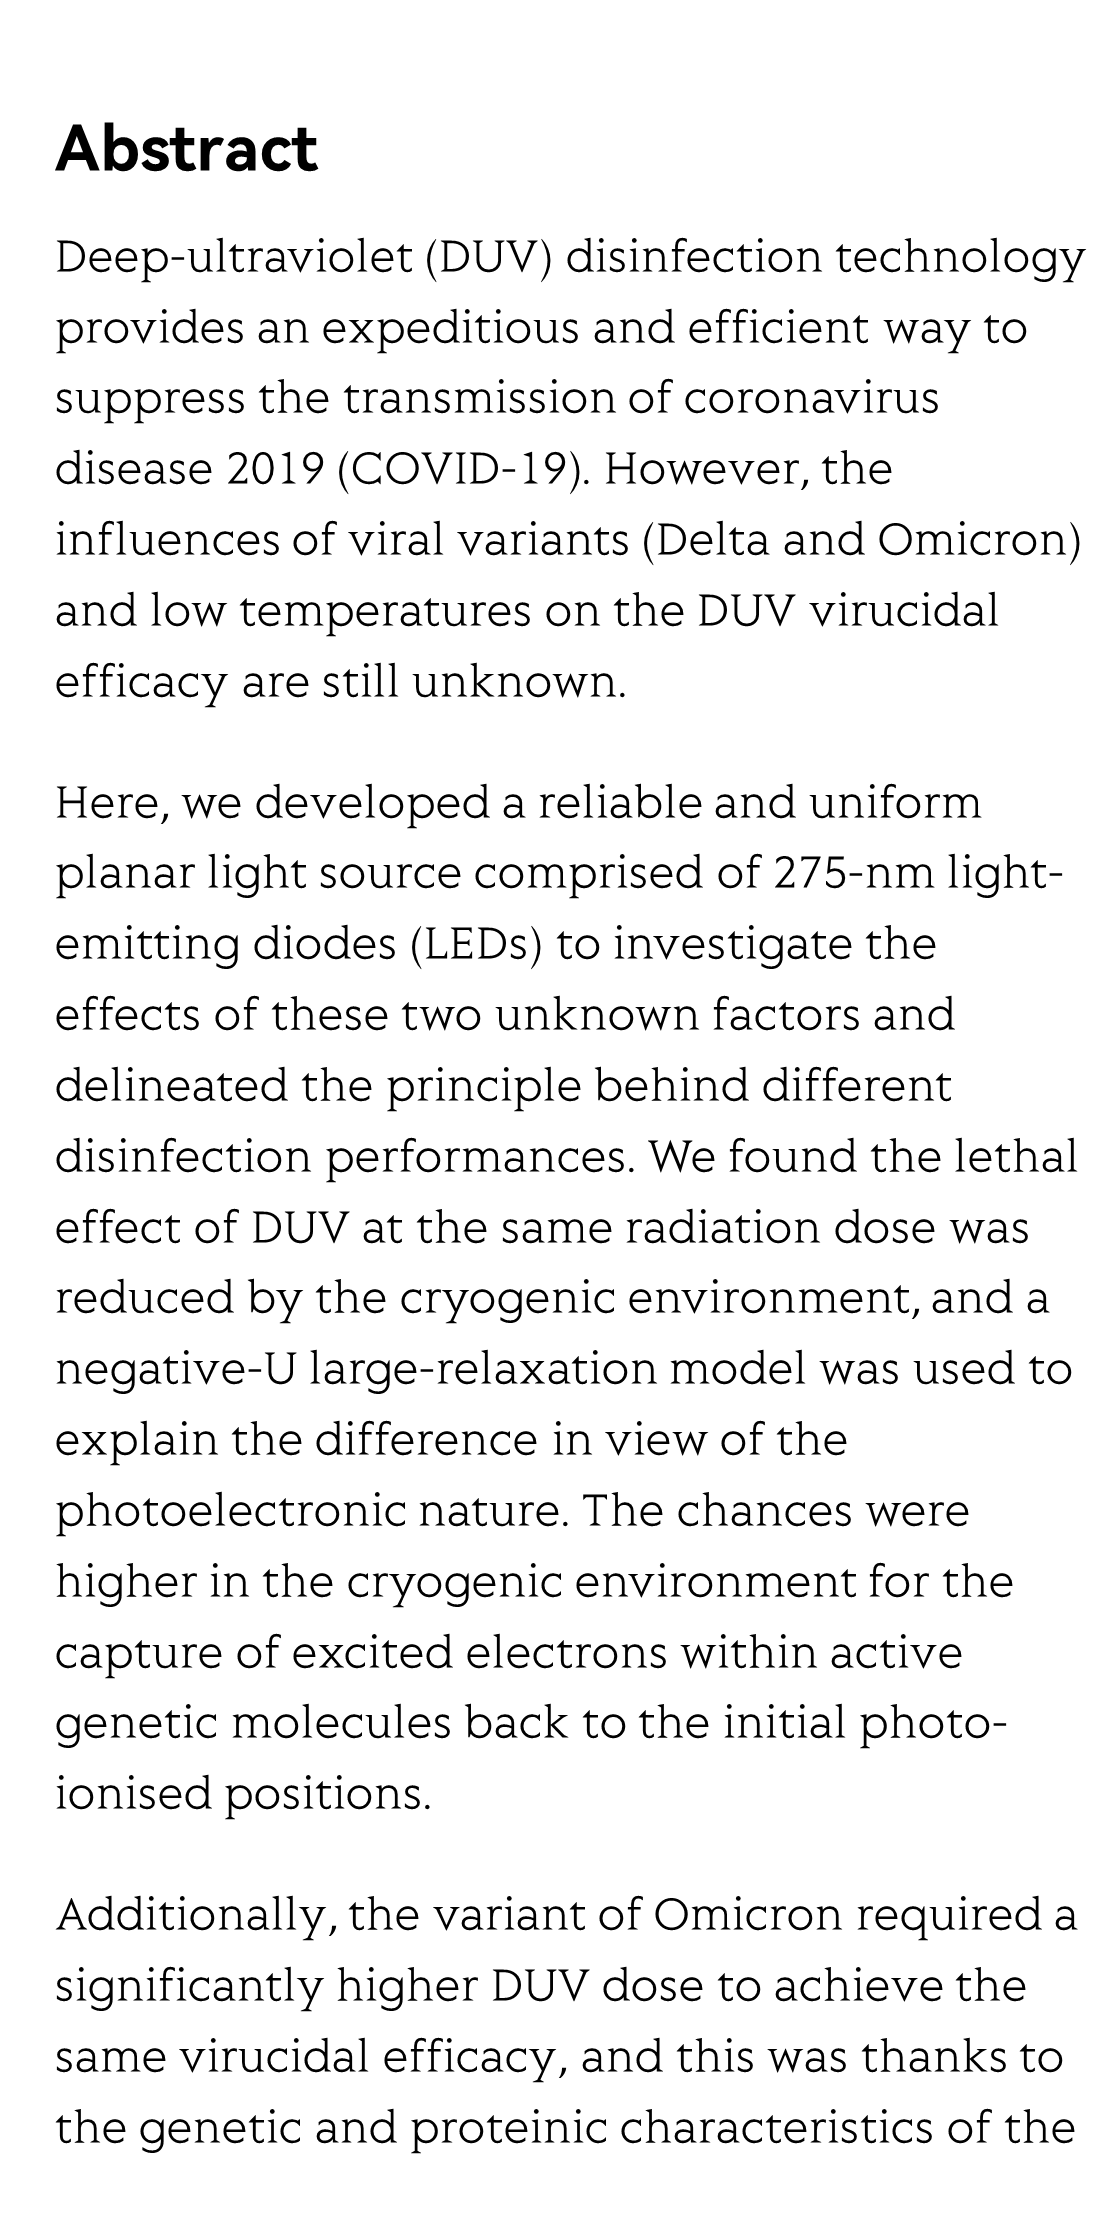 Deep-ultraviolet photonics for the disinfection of SARS-CoV-2 and its variants (Delta and Omicron) in the cryogenic environment_2